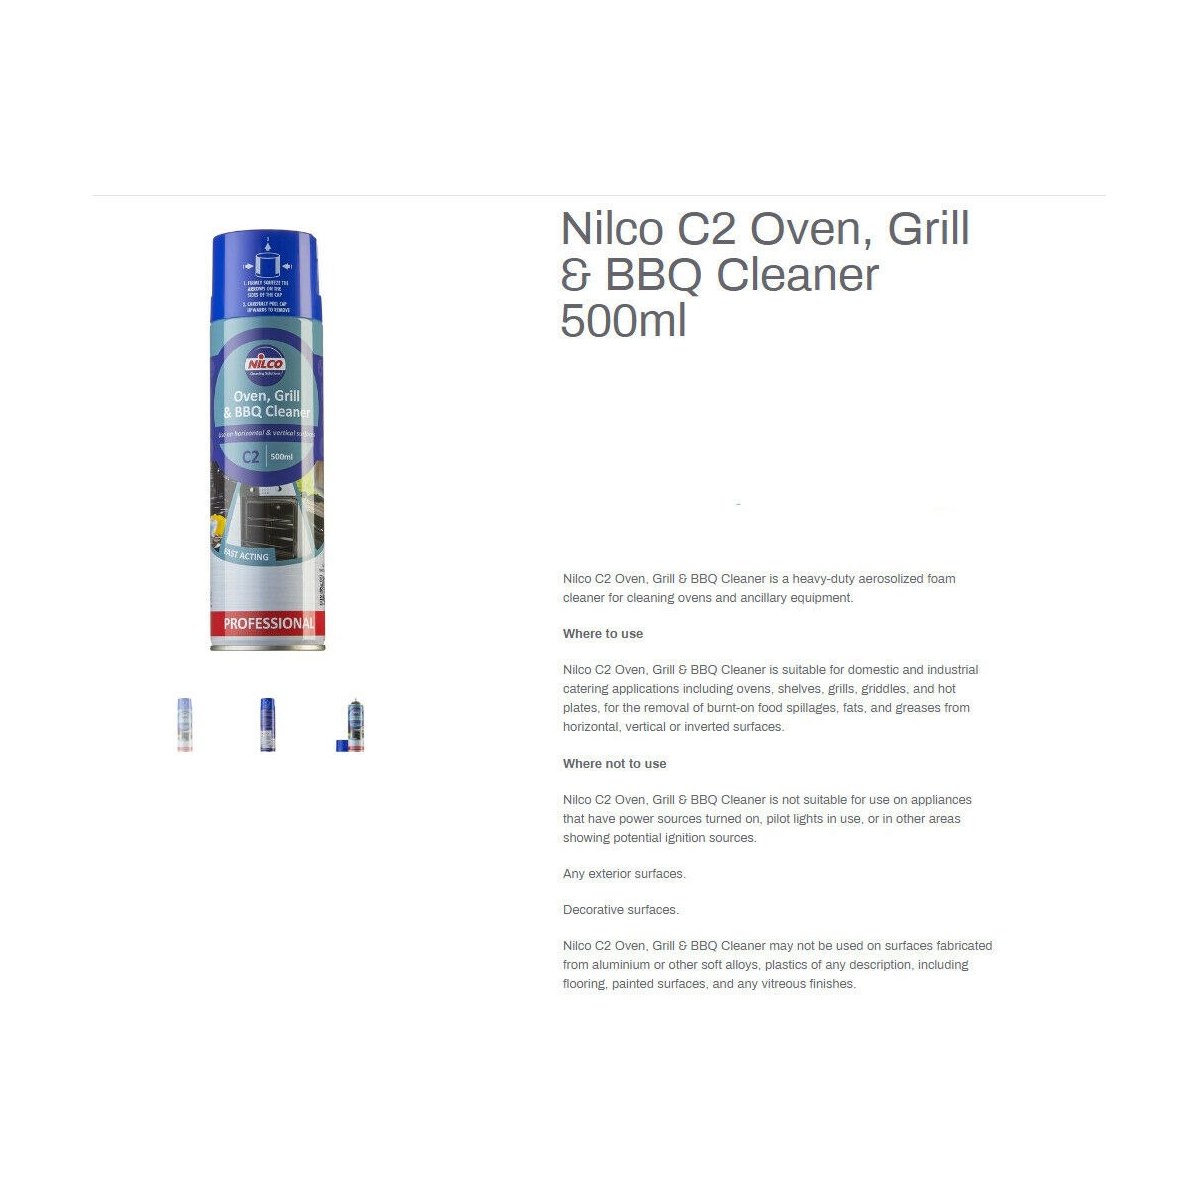 Nilco C2 Oven Cleaning Spray